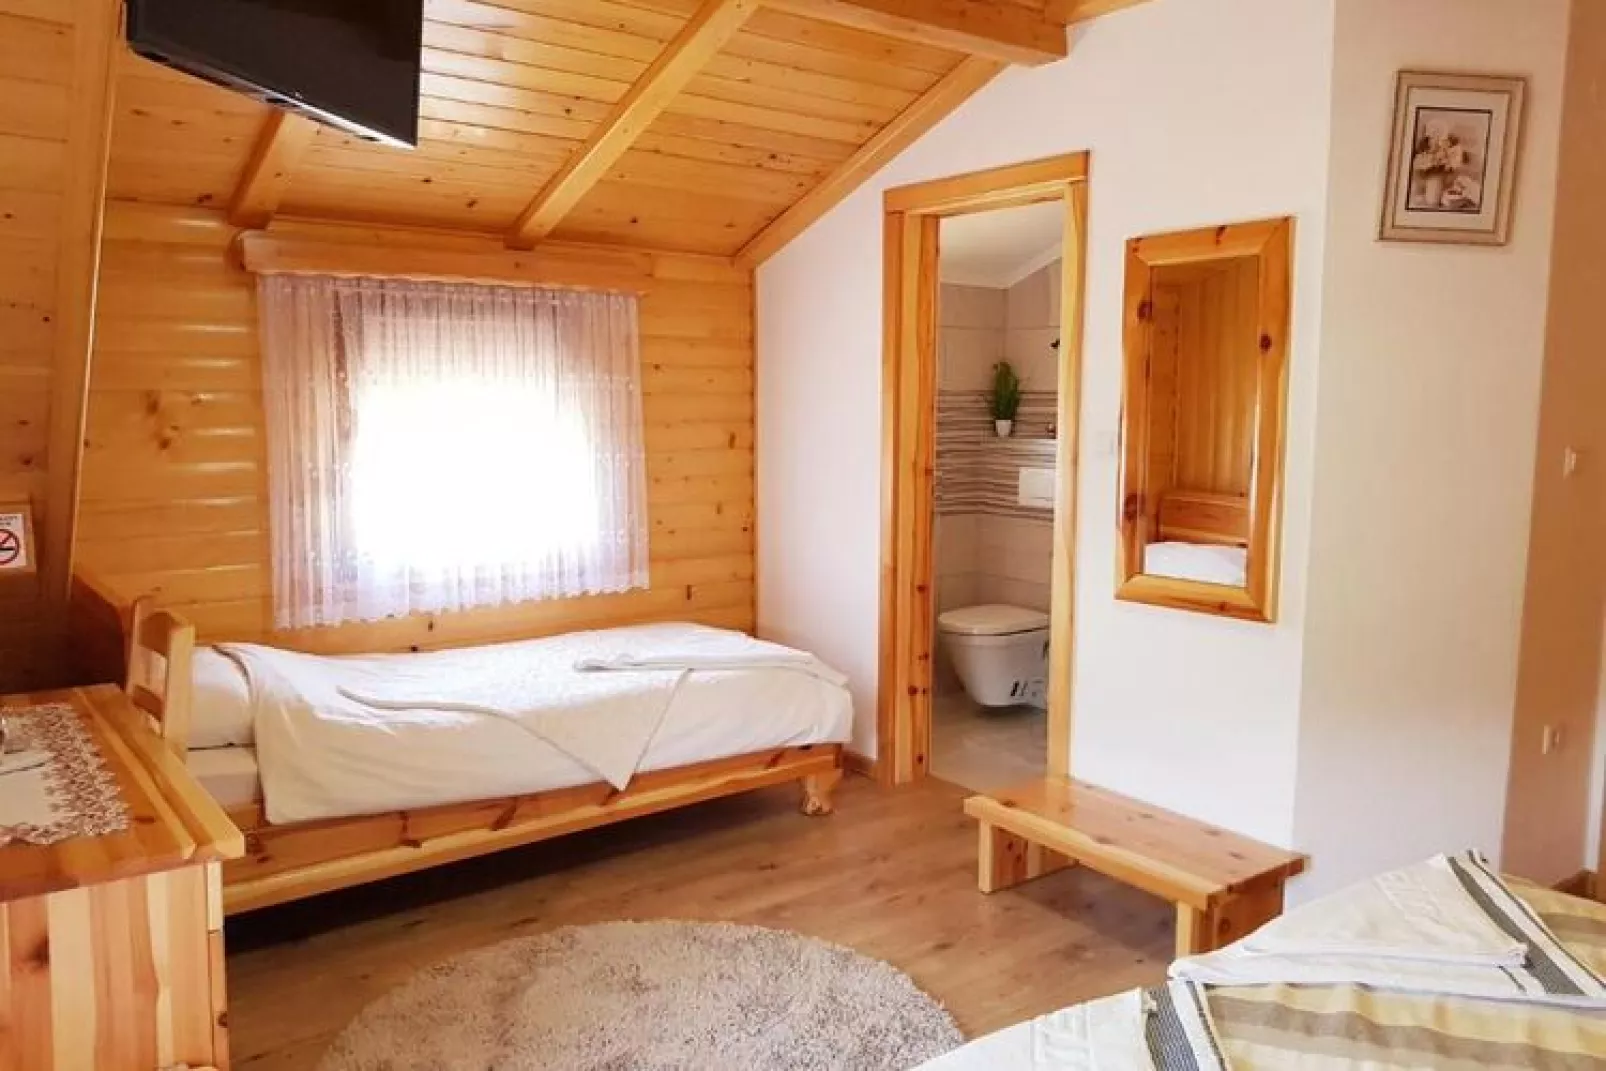 Green Valley Guesthouse 4-bed room 4 person-Slaapkamer